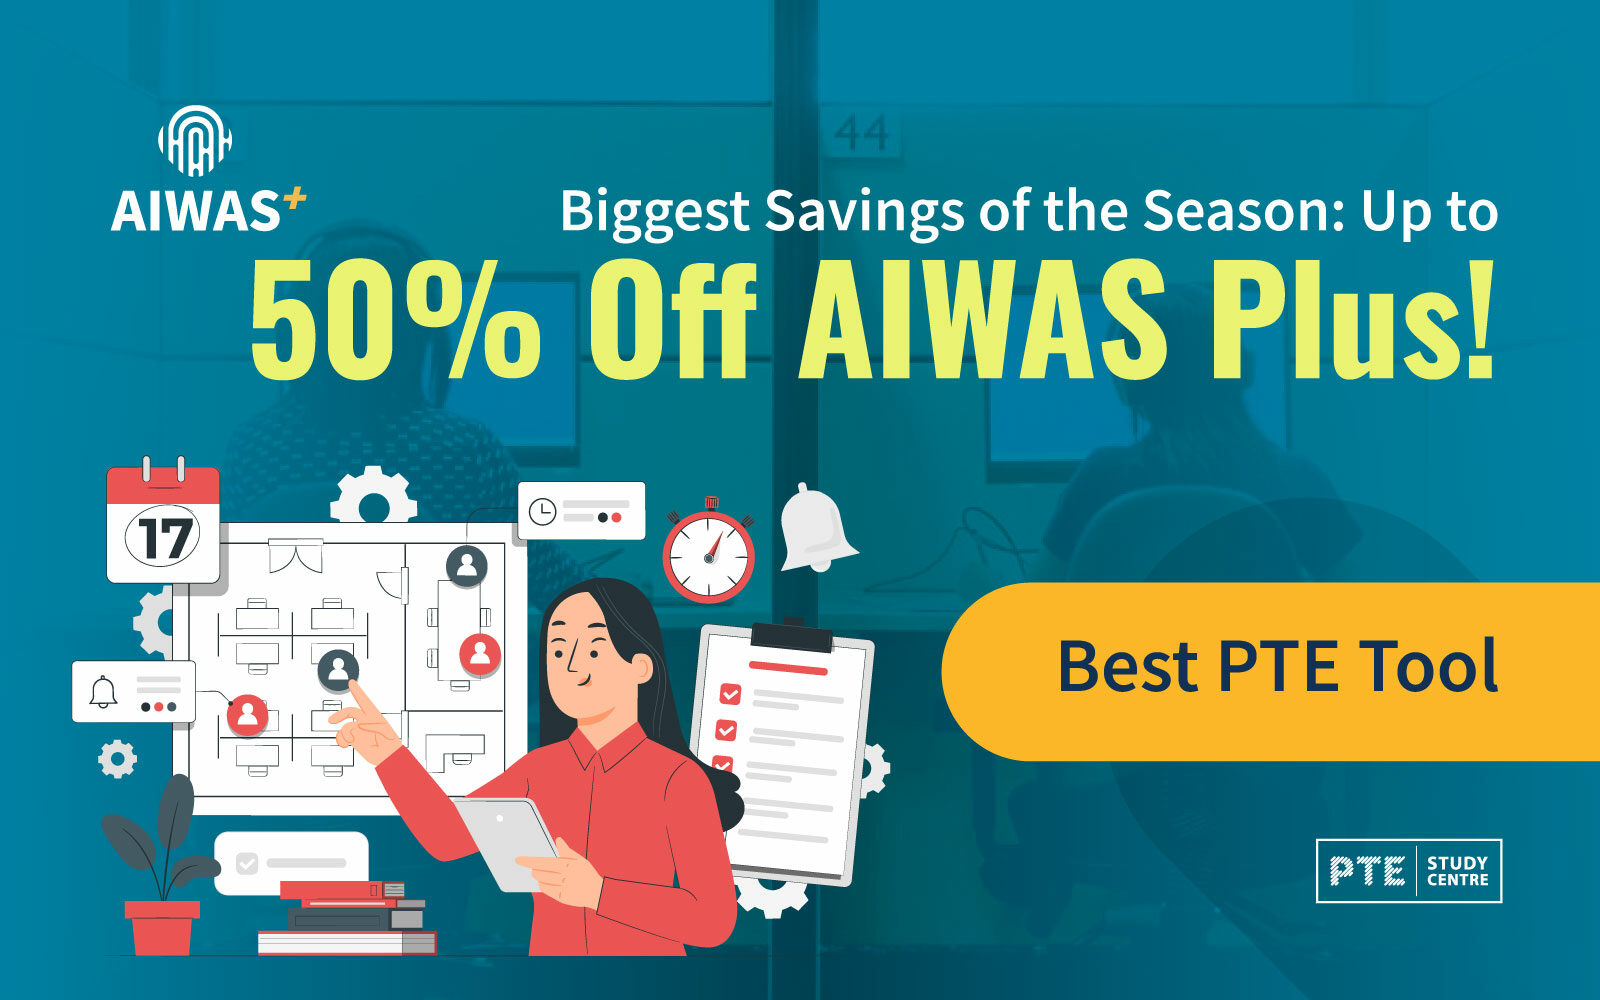 Biggest Savings of the Season: Up to 50% Off AIWAS Plus! image